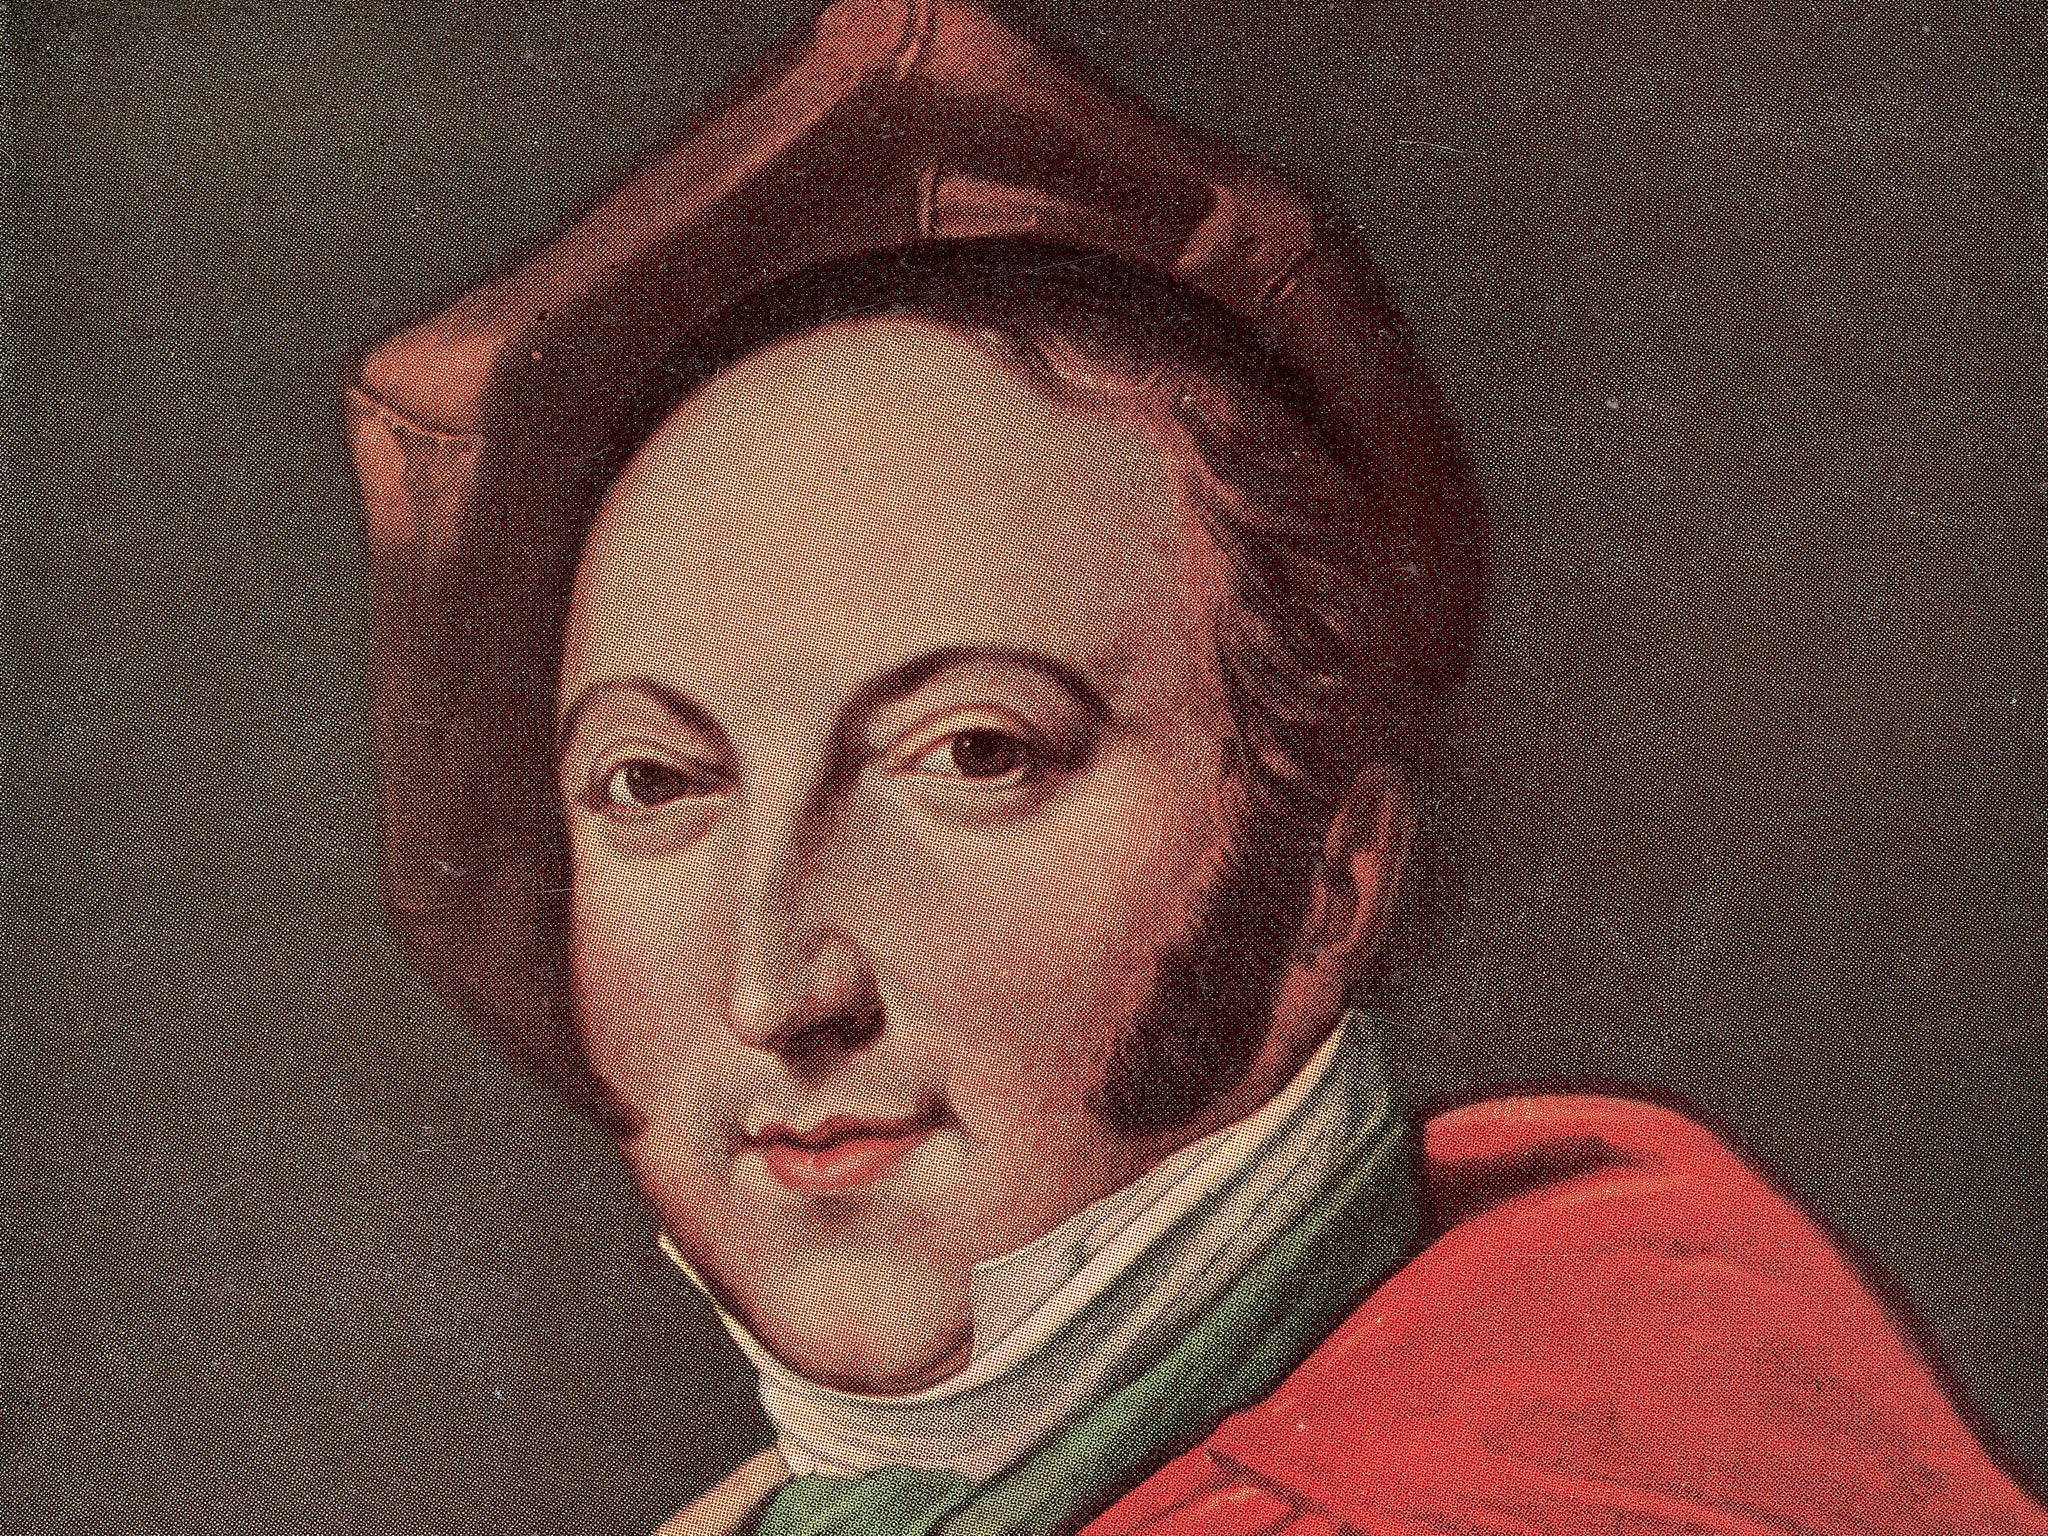 The Italian composer Gioachino Rossini is known for his comic operas such as 'The Barber of Seville'